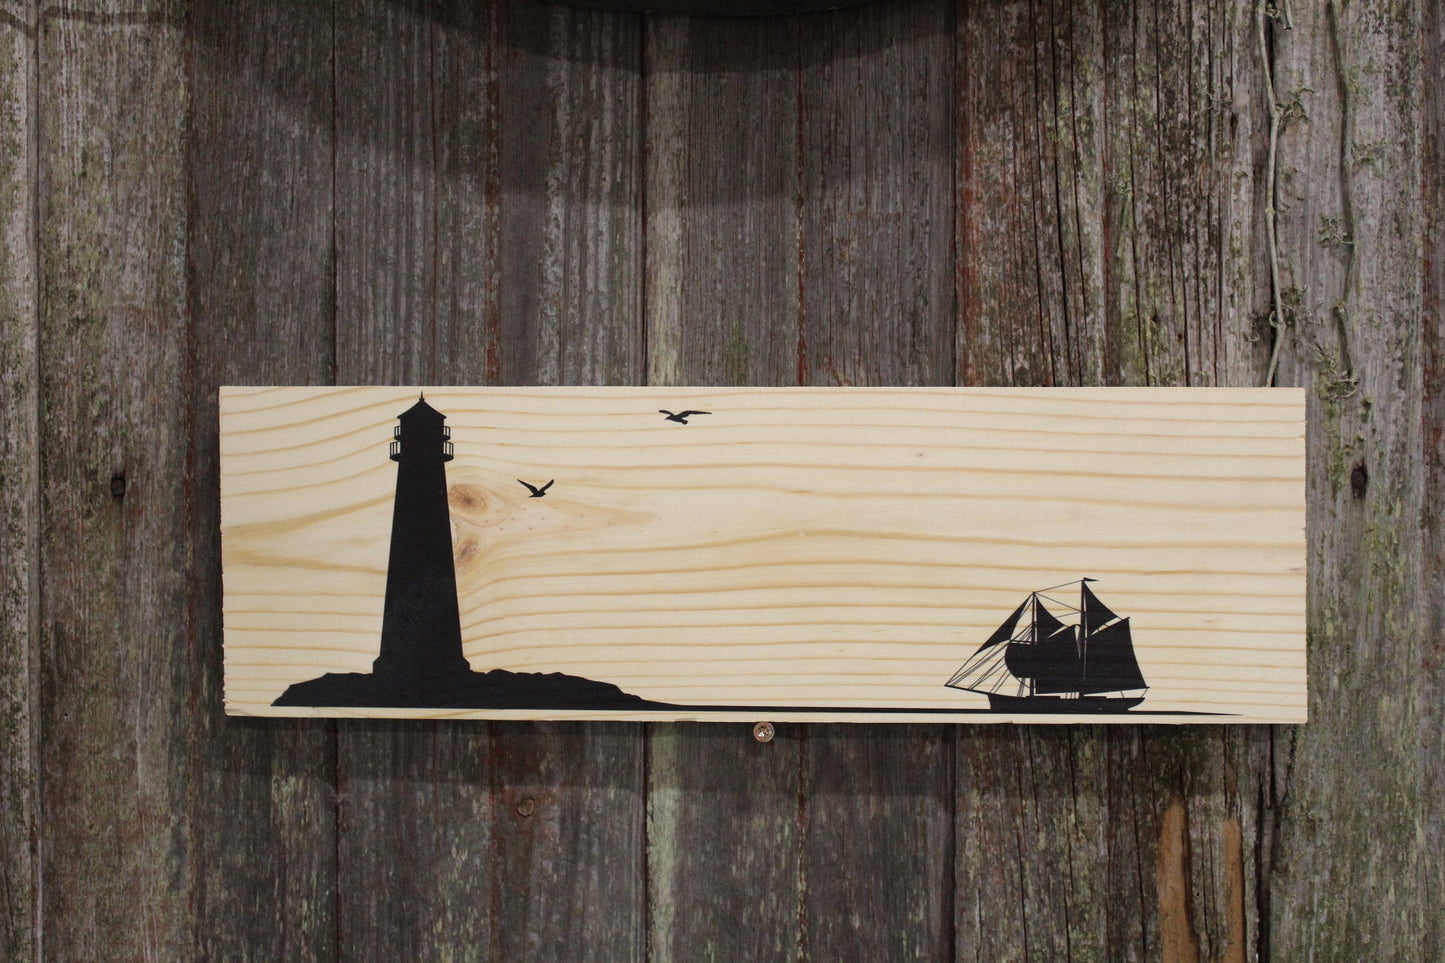 Light House Sail Boat Sign Wall Hanging Silhouette Simple Clean Beach Ocean Rustic Seagulls Sitter Decoration Nautical Wood Print